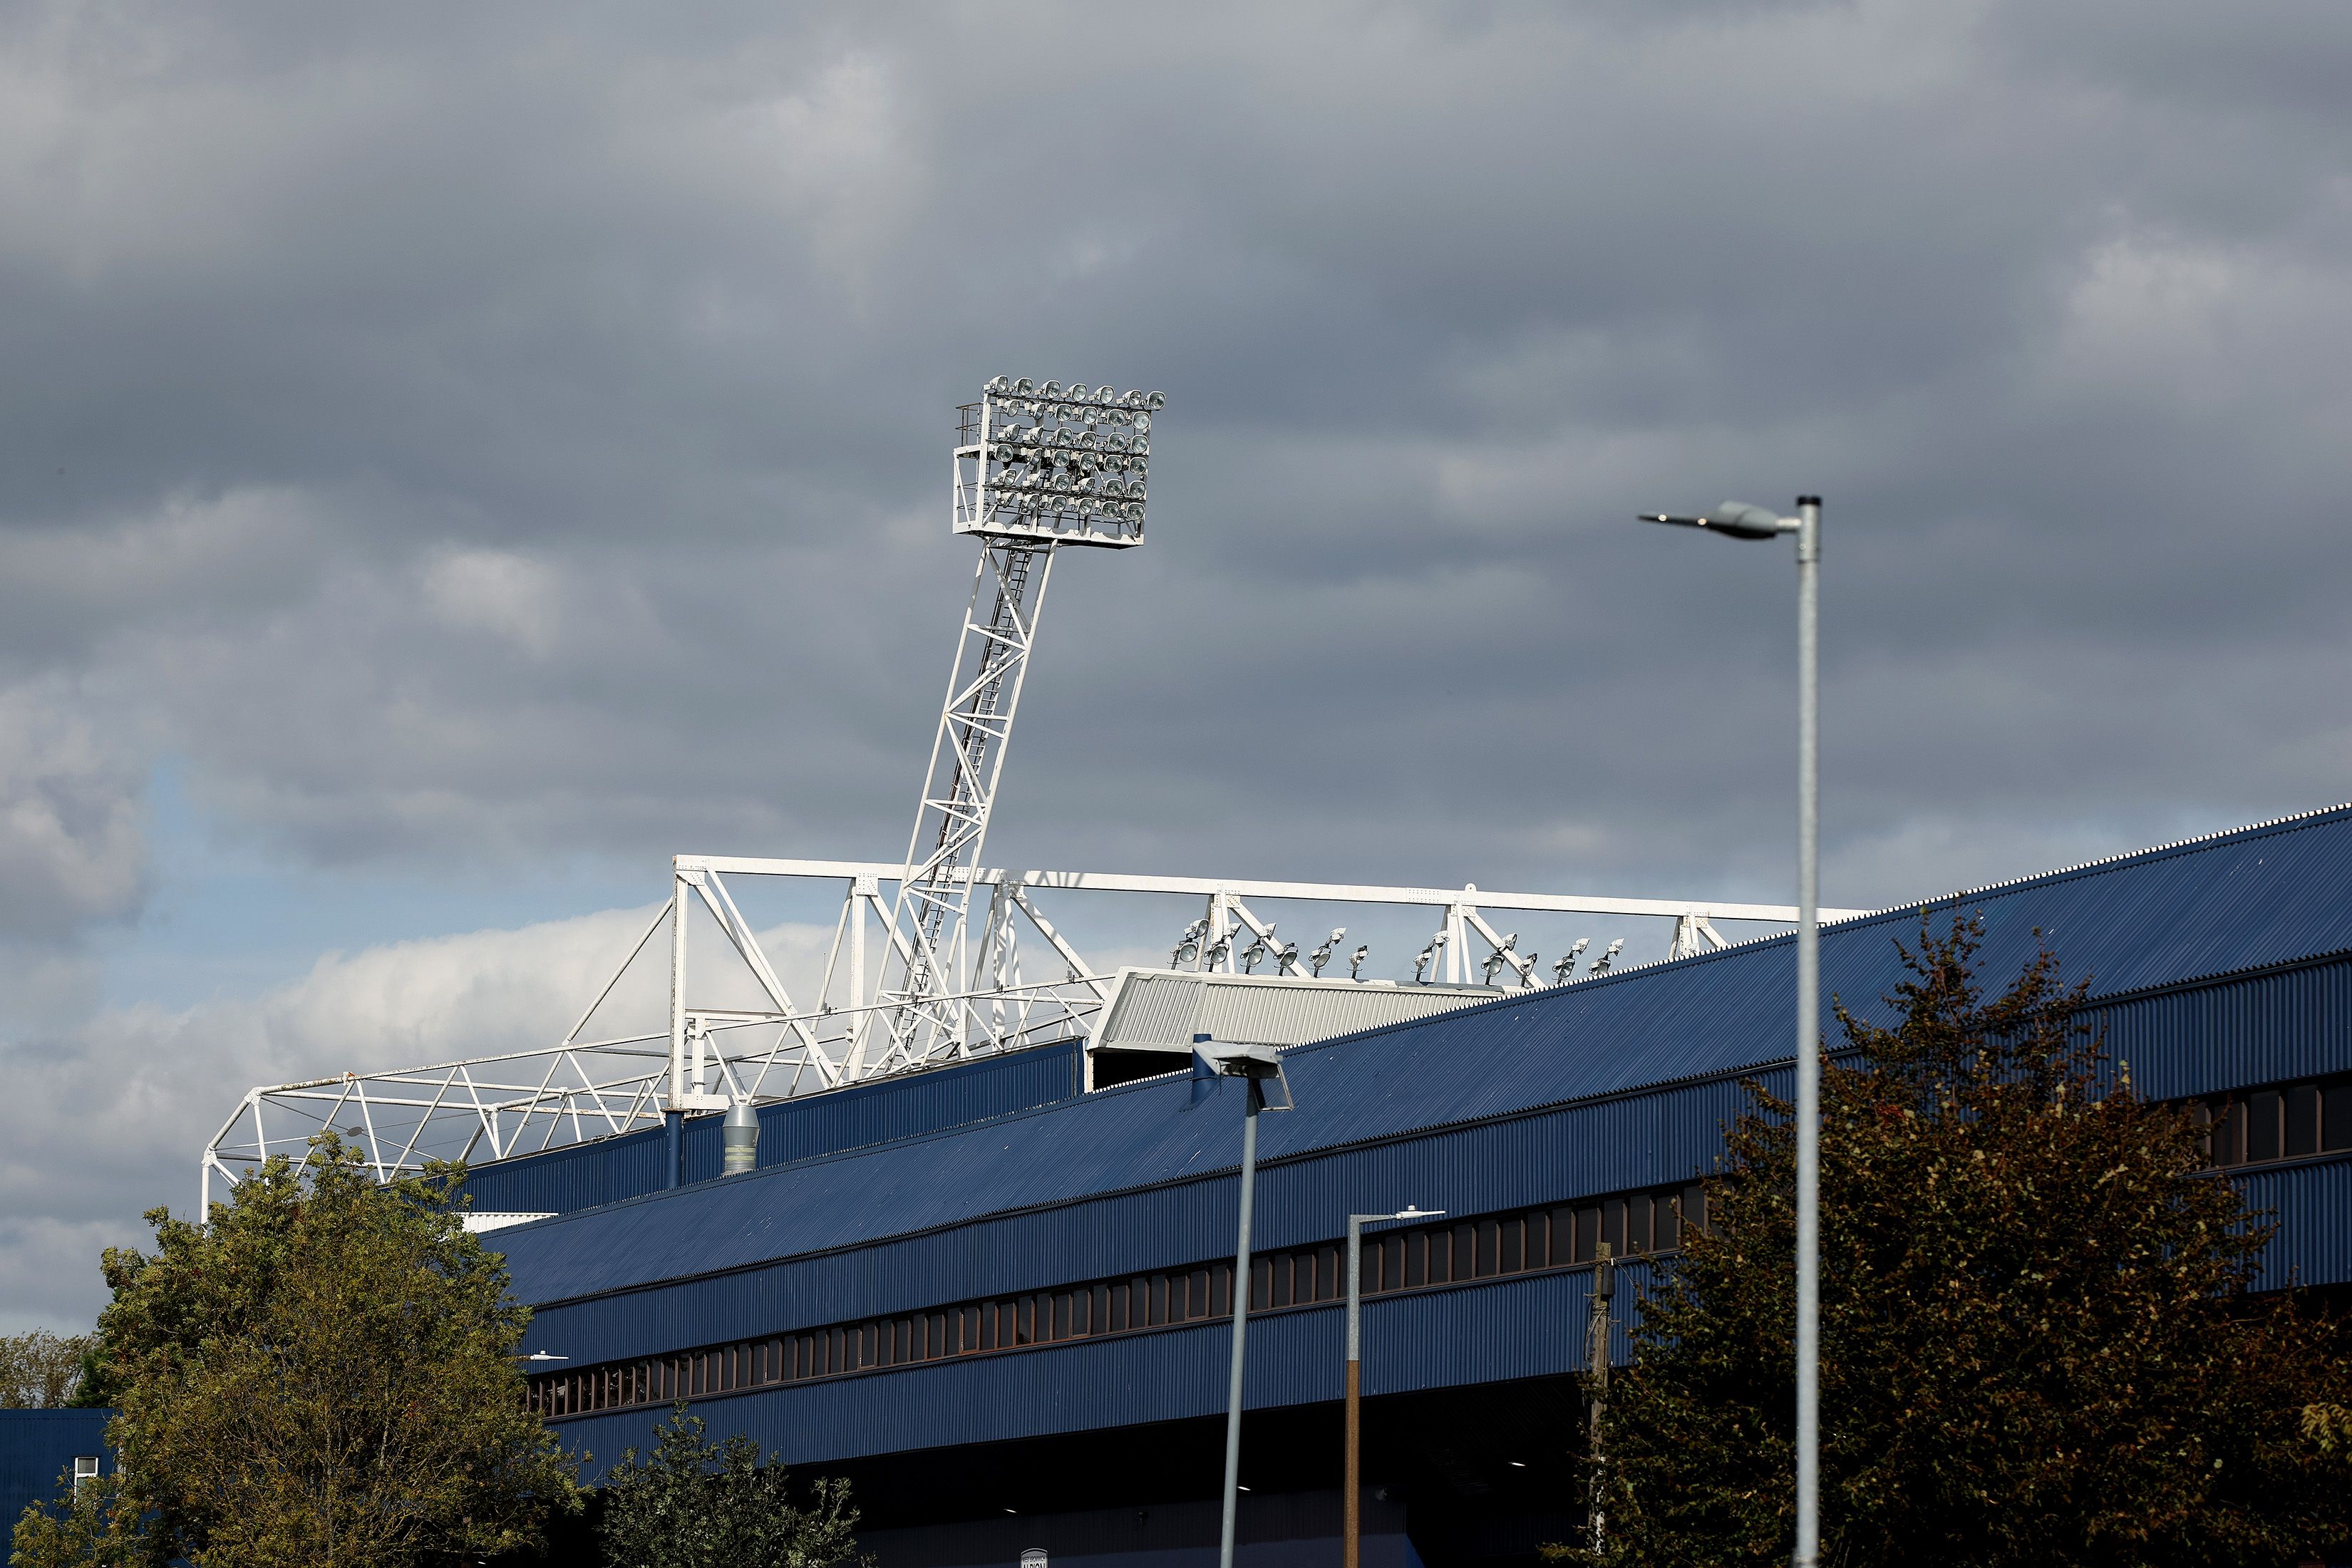 A view of a floodlight at The Hawthorns with a grey sky above